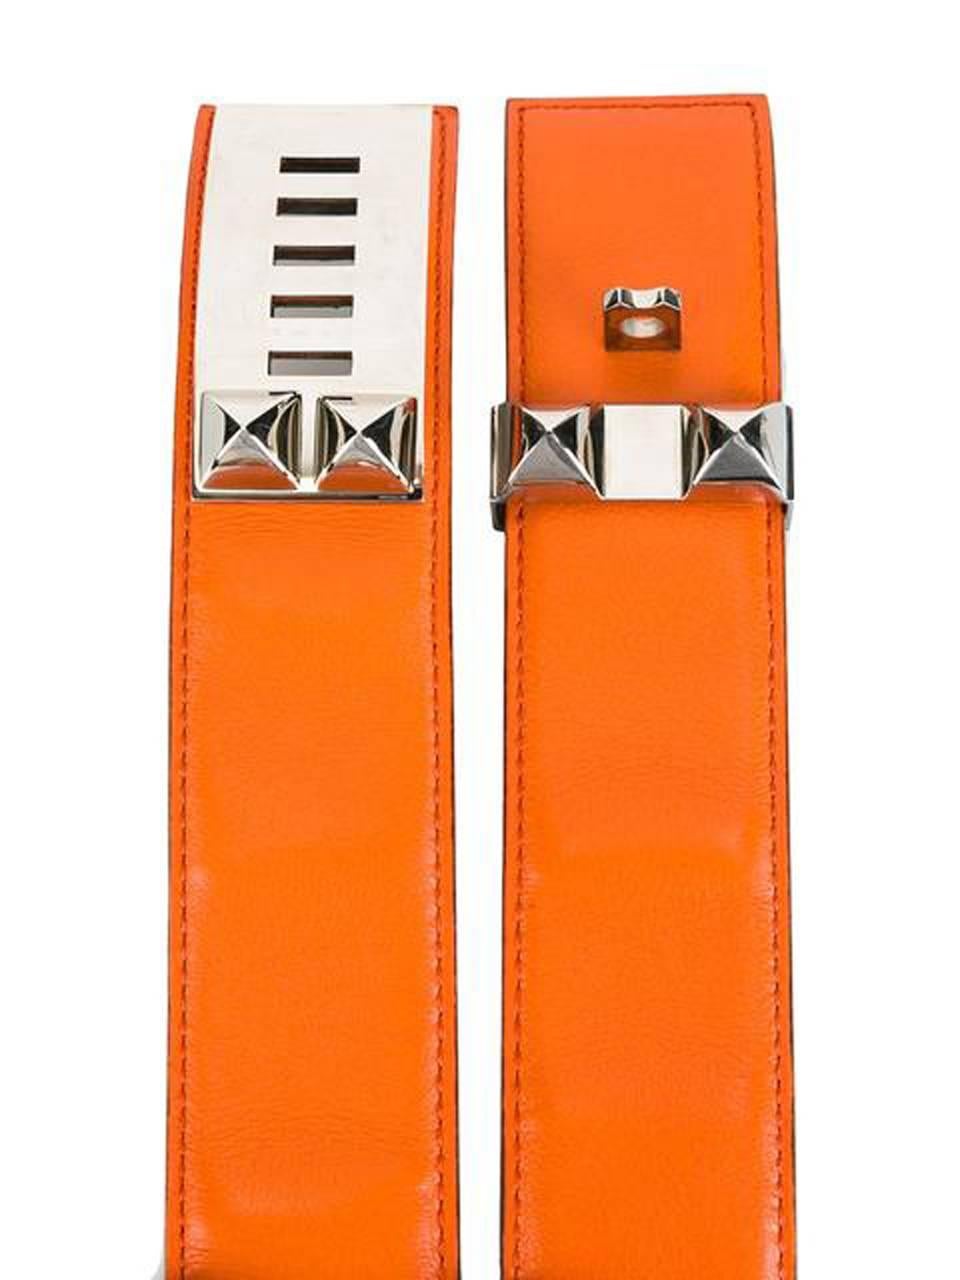 Gorgeous orange calfskin leather Hermès and  palladium-plated stud detail belt  featuring palladium-plated hardware and an internal logo stamp, with palladium-plated  Collier de Chien buckle.
Width: 1,5in. (4cm)
Maxi Length: 32.6in. (83cm)
In good